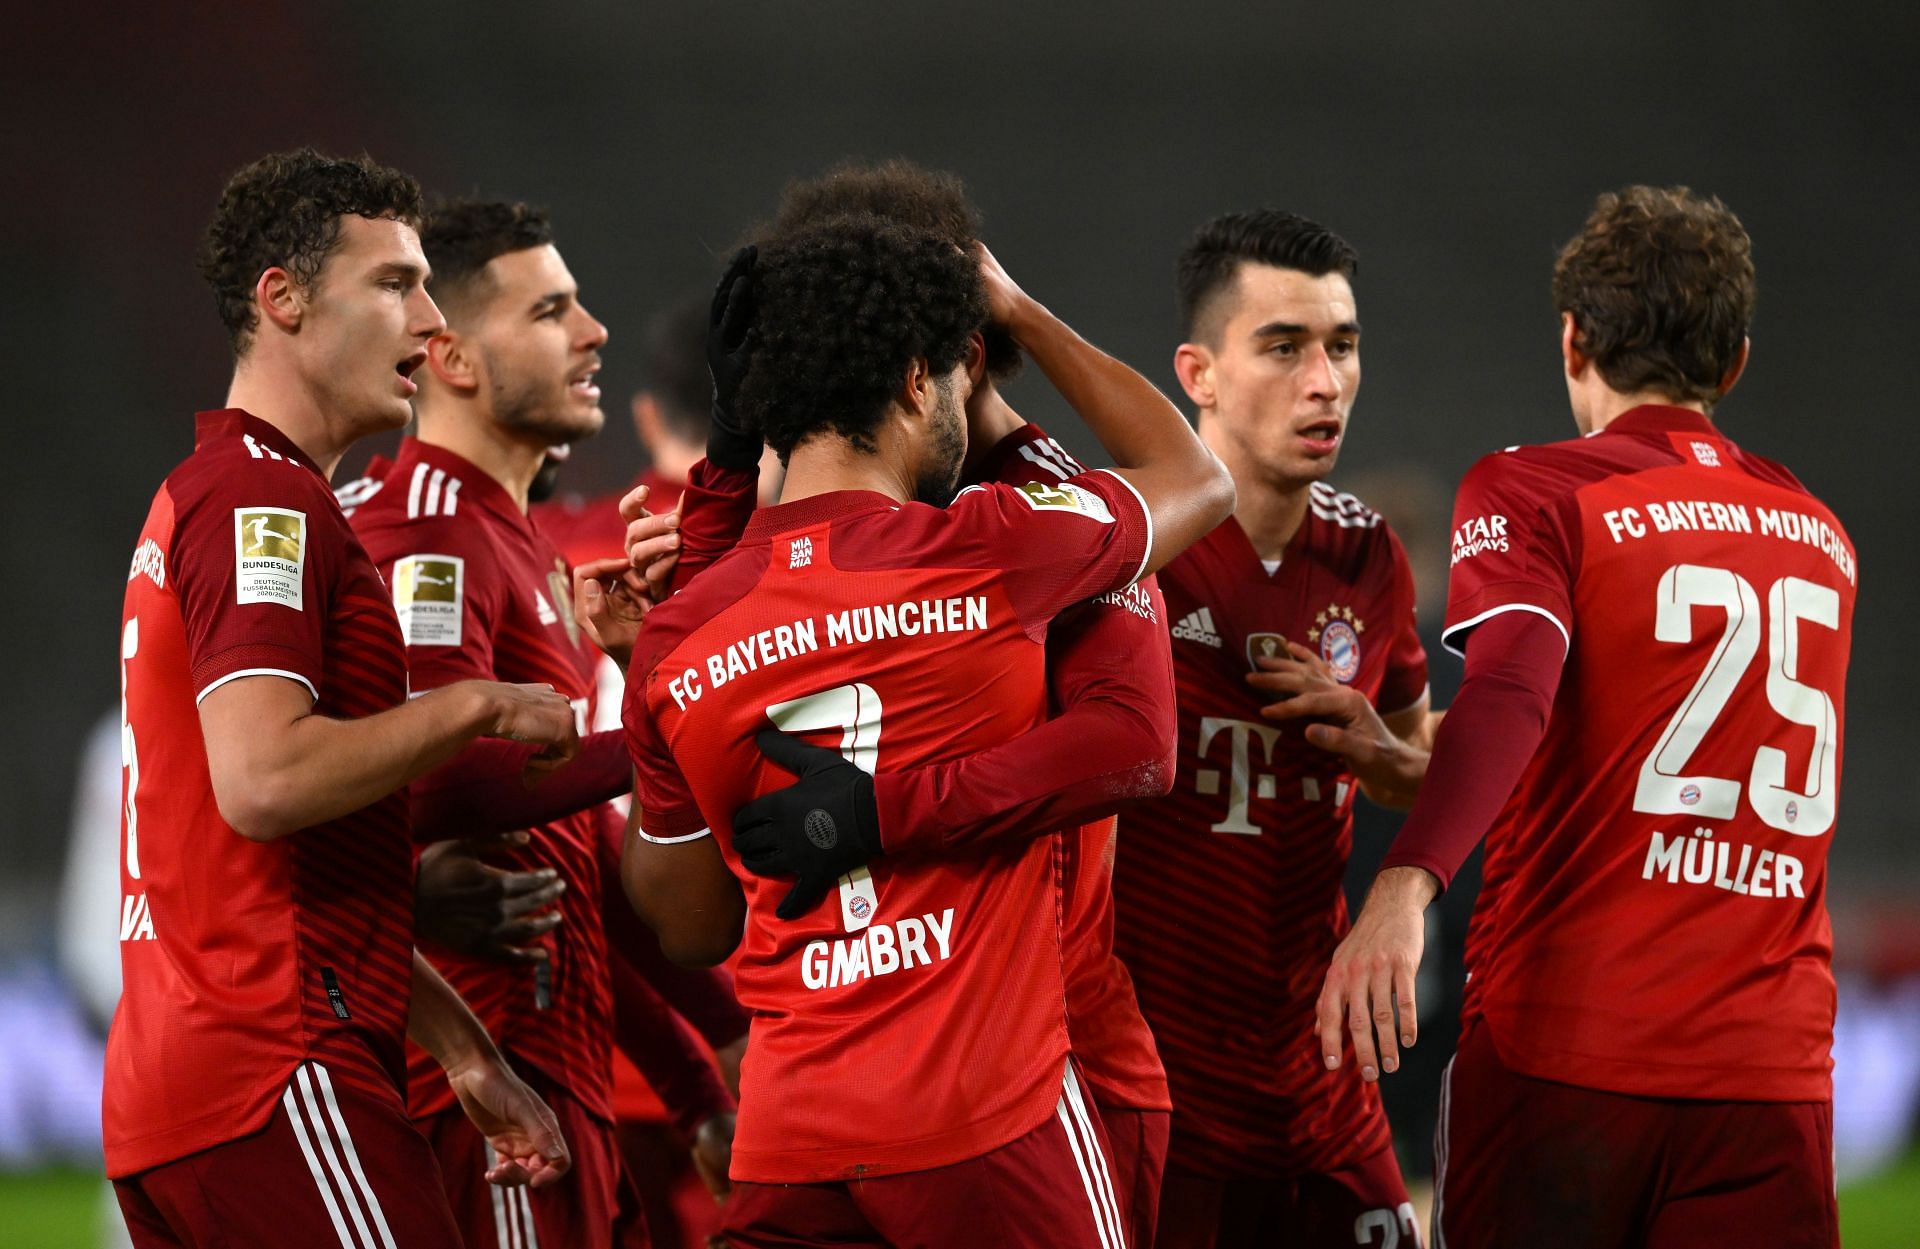 Bayern Munich recorded another comfortable win in the Bundesliga over Stuttgart on Tuesday.